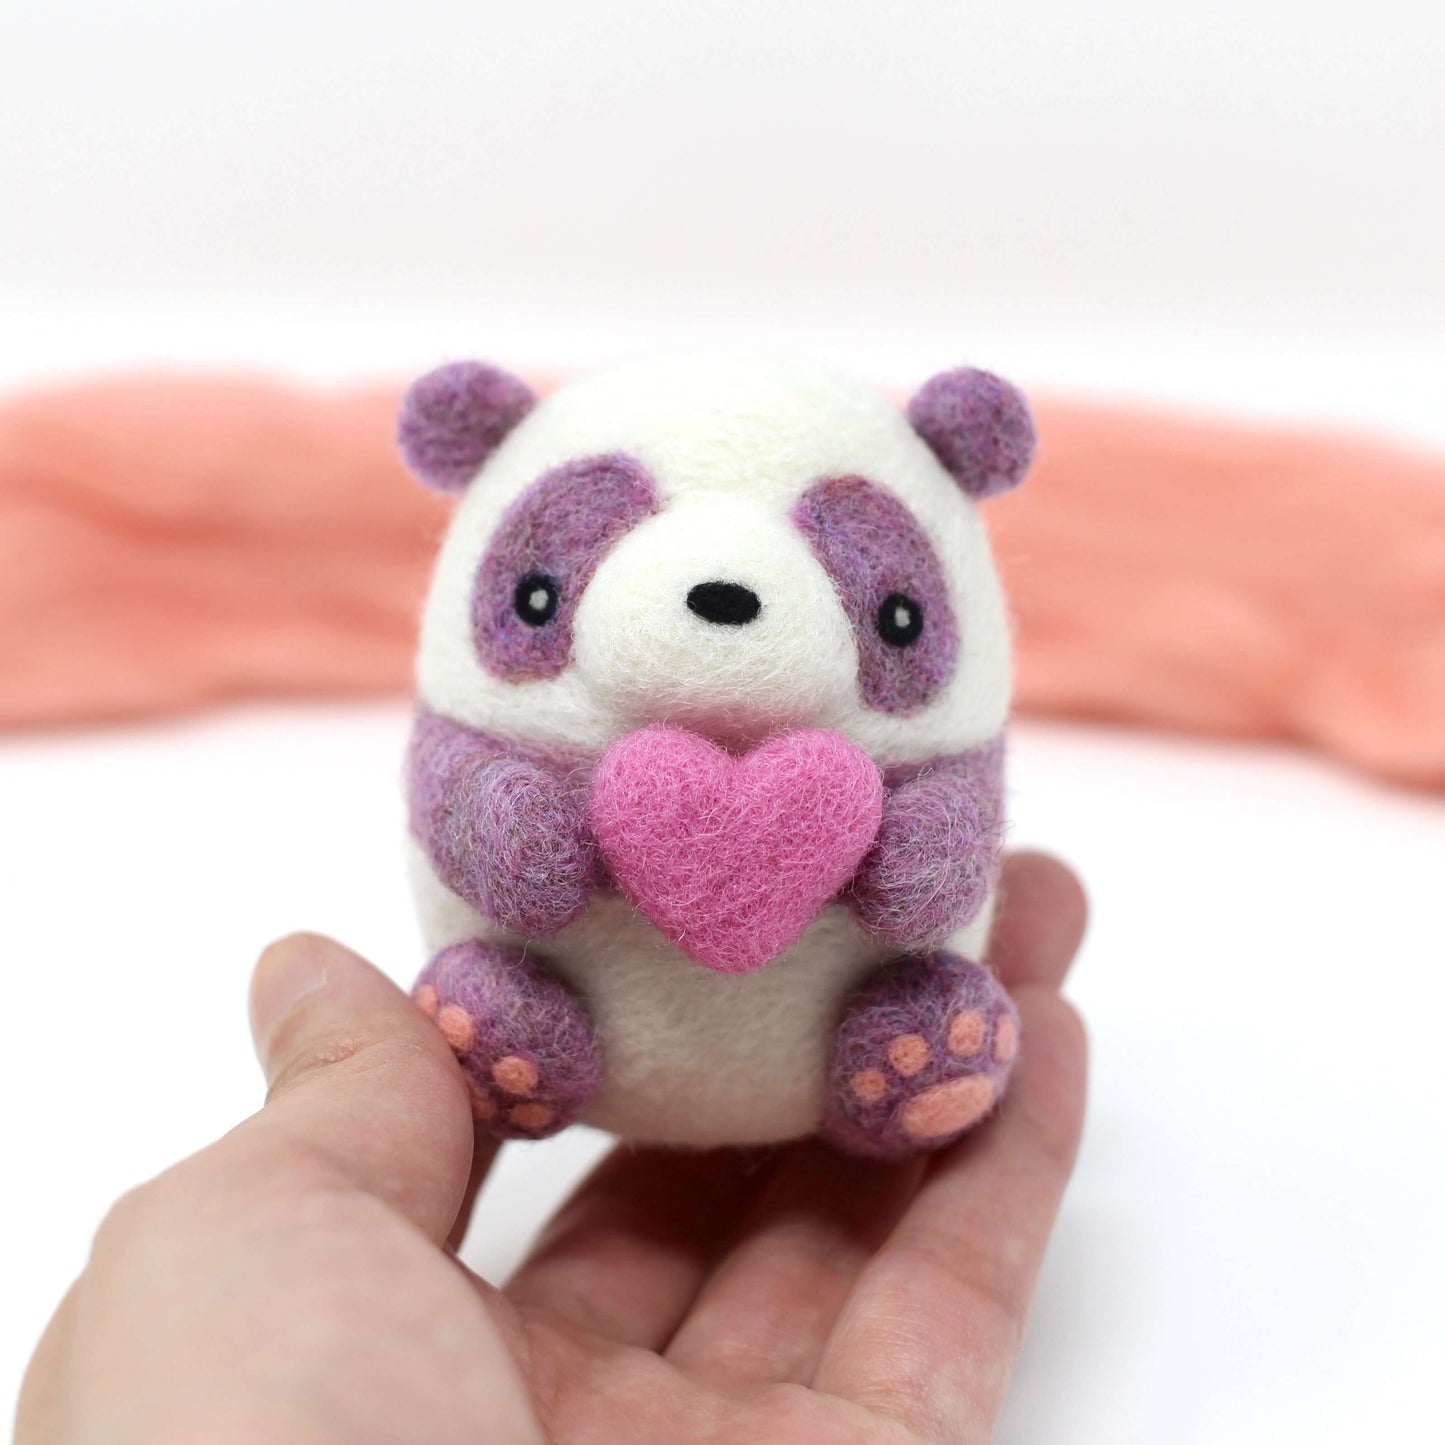 Needle Felted Purple Panda holding Heart (Pink) by Wild Whimsy Woolies